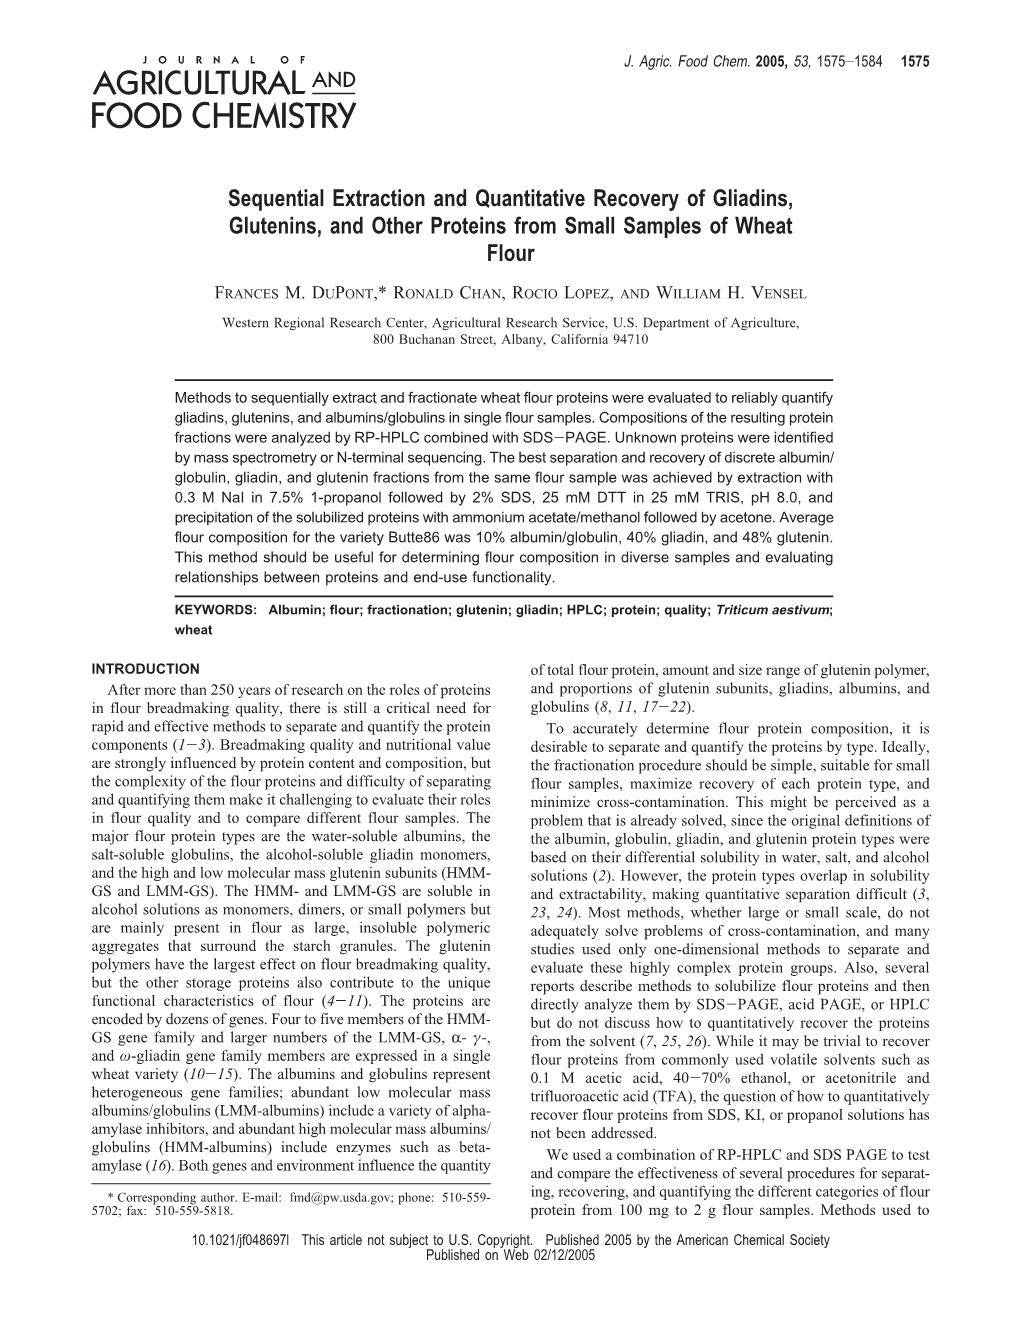 Sequential Extraction and Quantitative Recovery of Gliadins, Glutenins, and Other Proteins from Small Samples of Wheat Flour